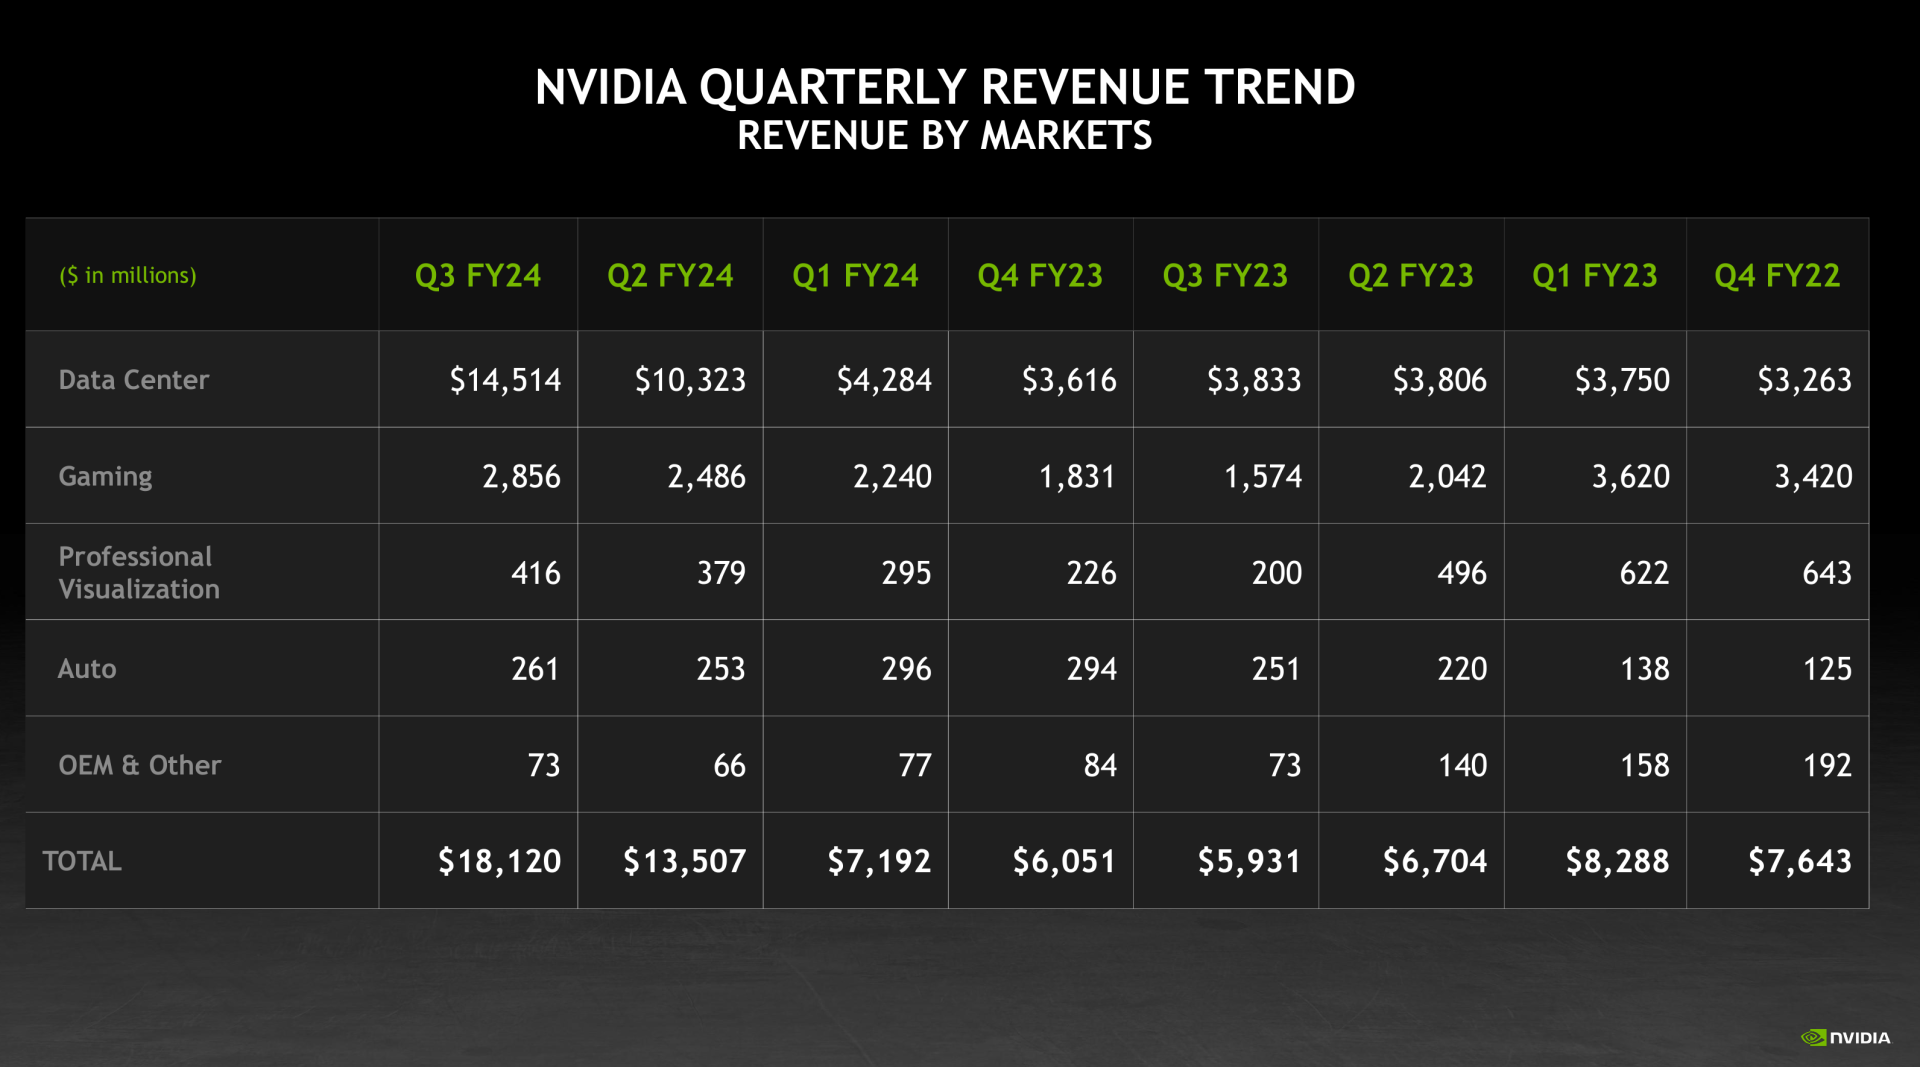 NVIDIA-Q3-FY24-Earnings-Breakdown-1920x1067_large.png